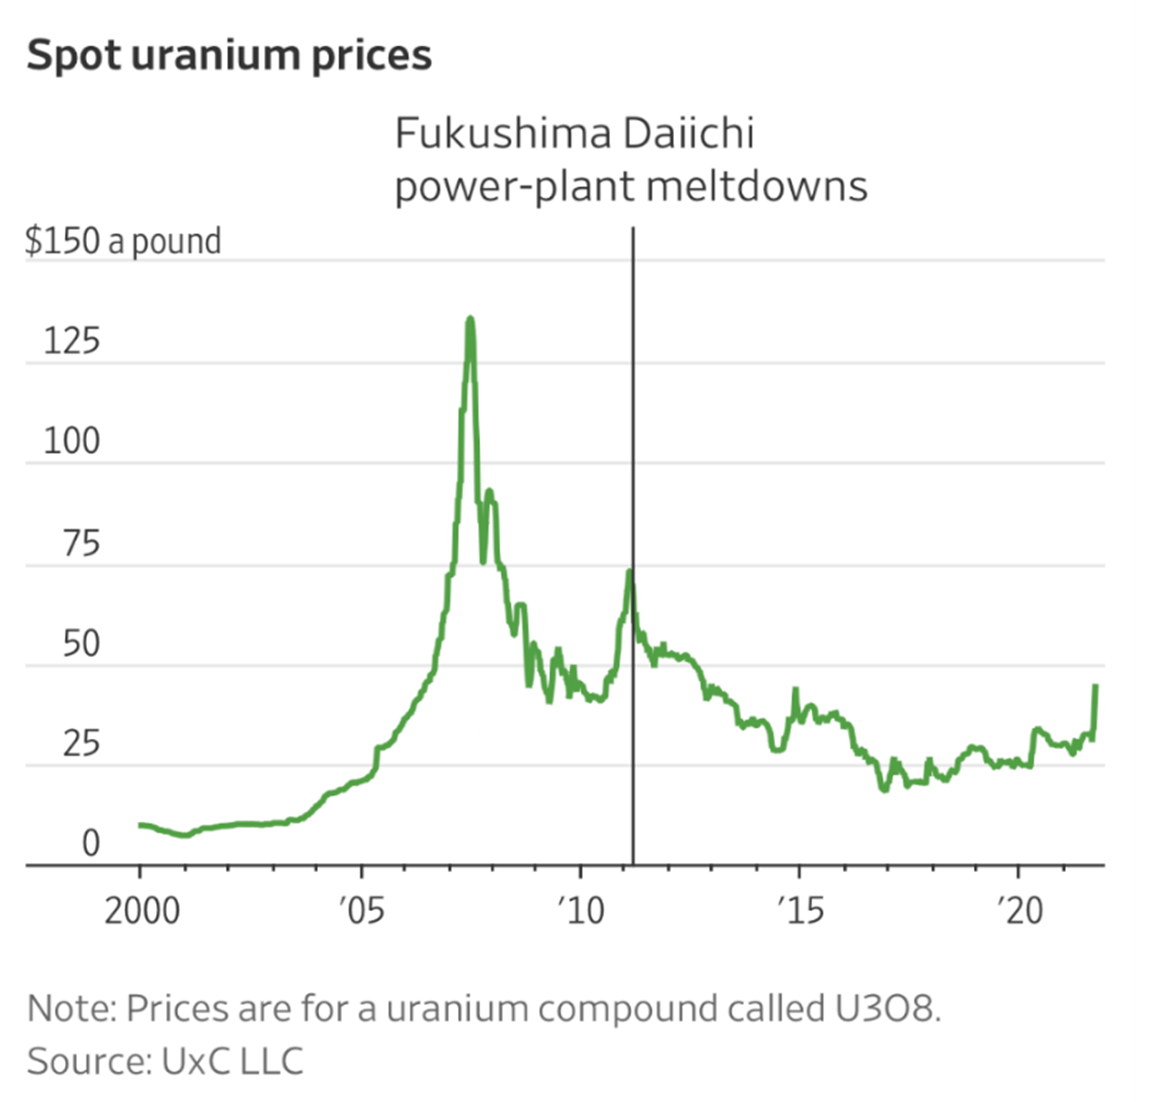 A graph showing the price of uranium from 2000 to 2020